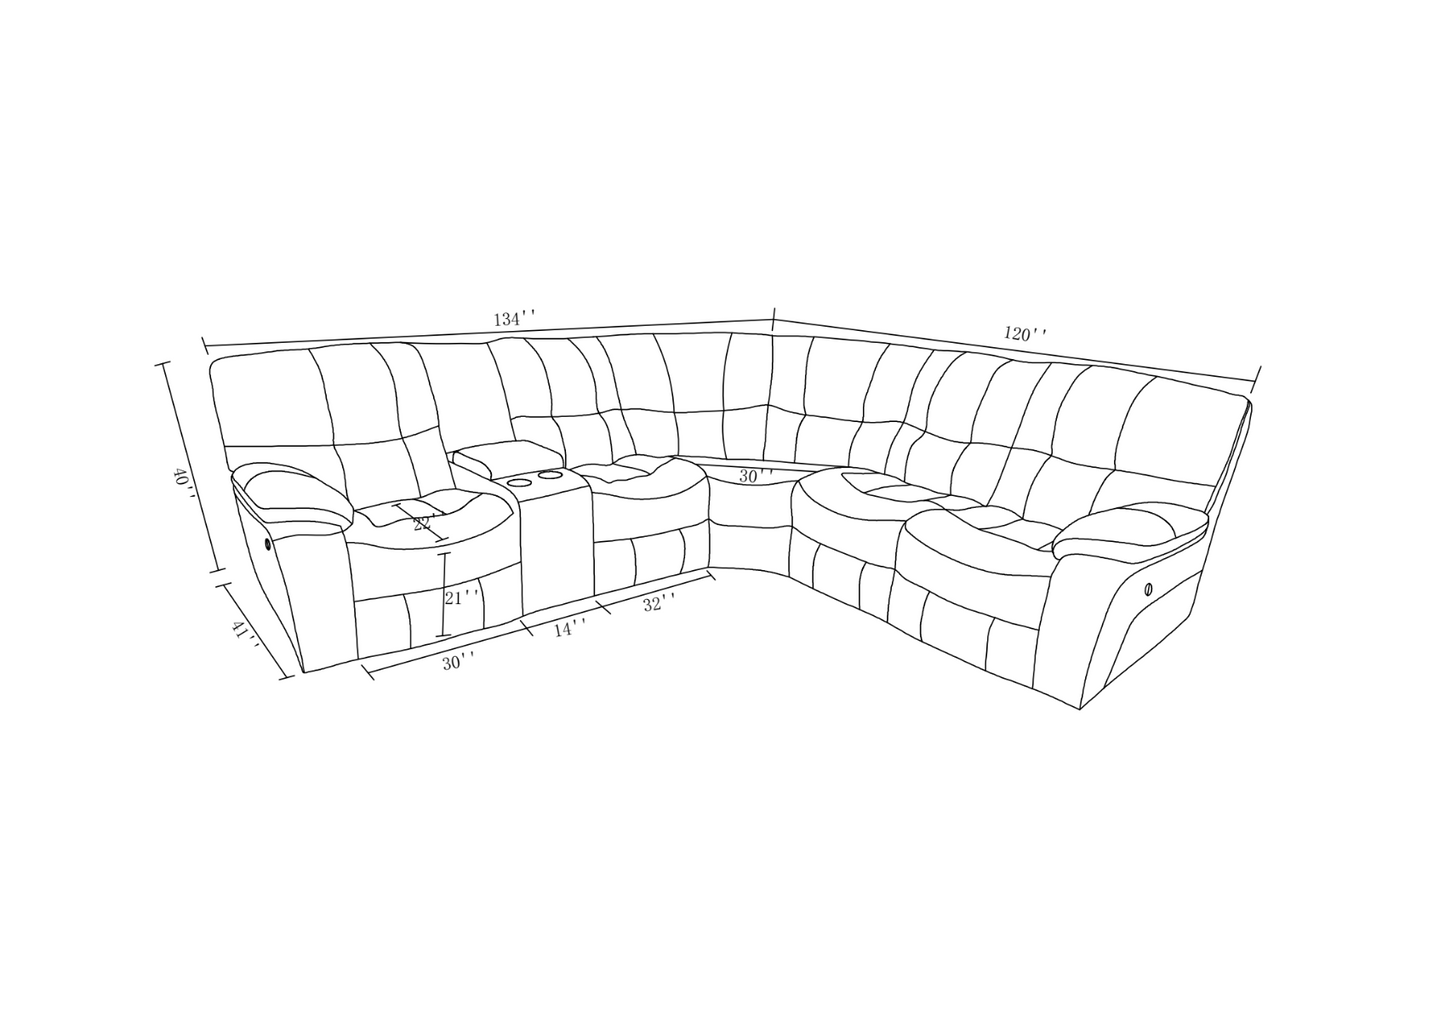 Global United 9931 Rho Dark Brown Motion Sectional w/Power Recliners